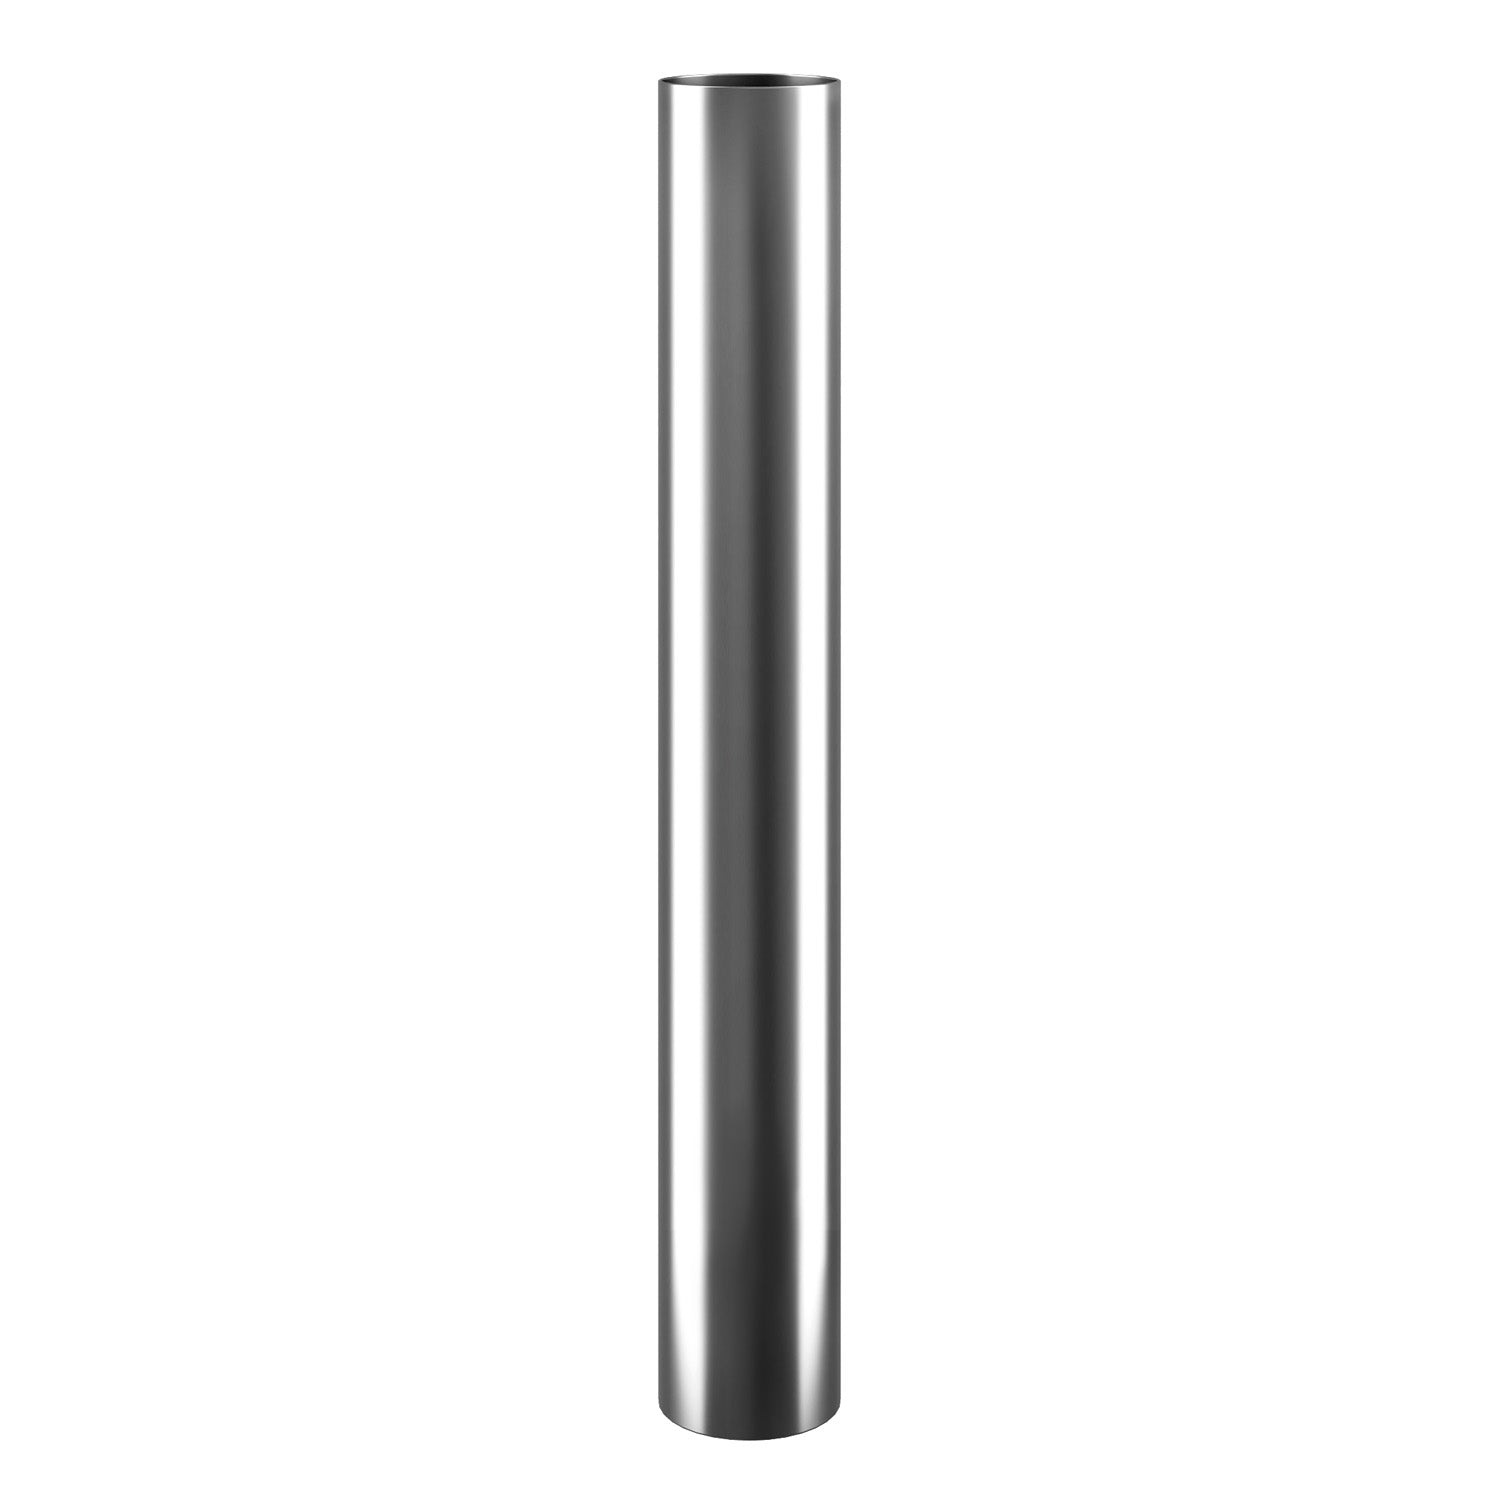 Beelonia pipe 500-1000mm, V2A stainless steel for smoking ovens